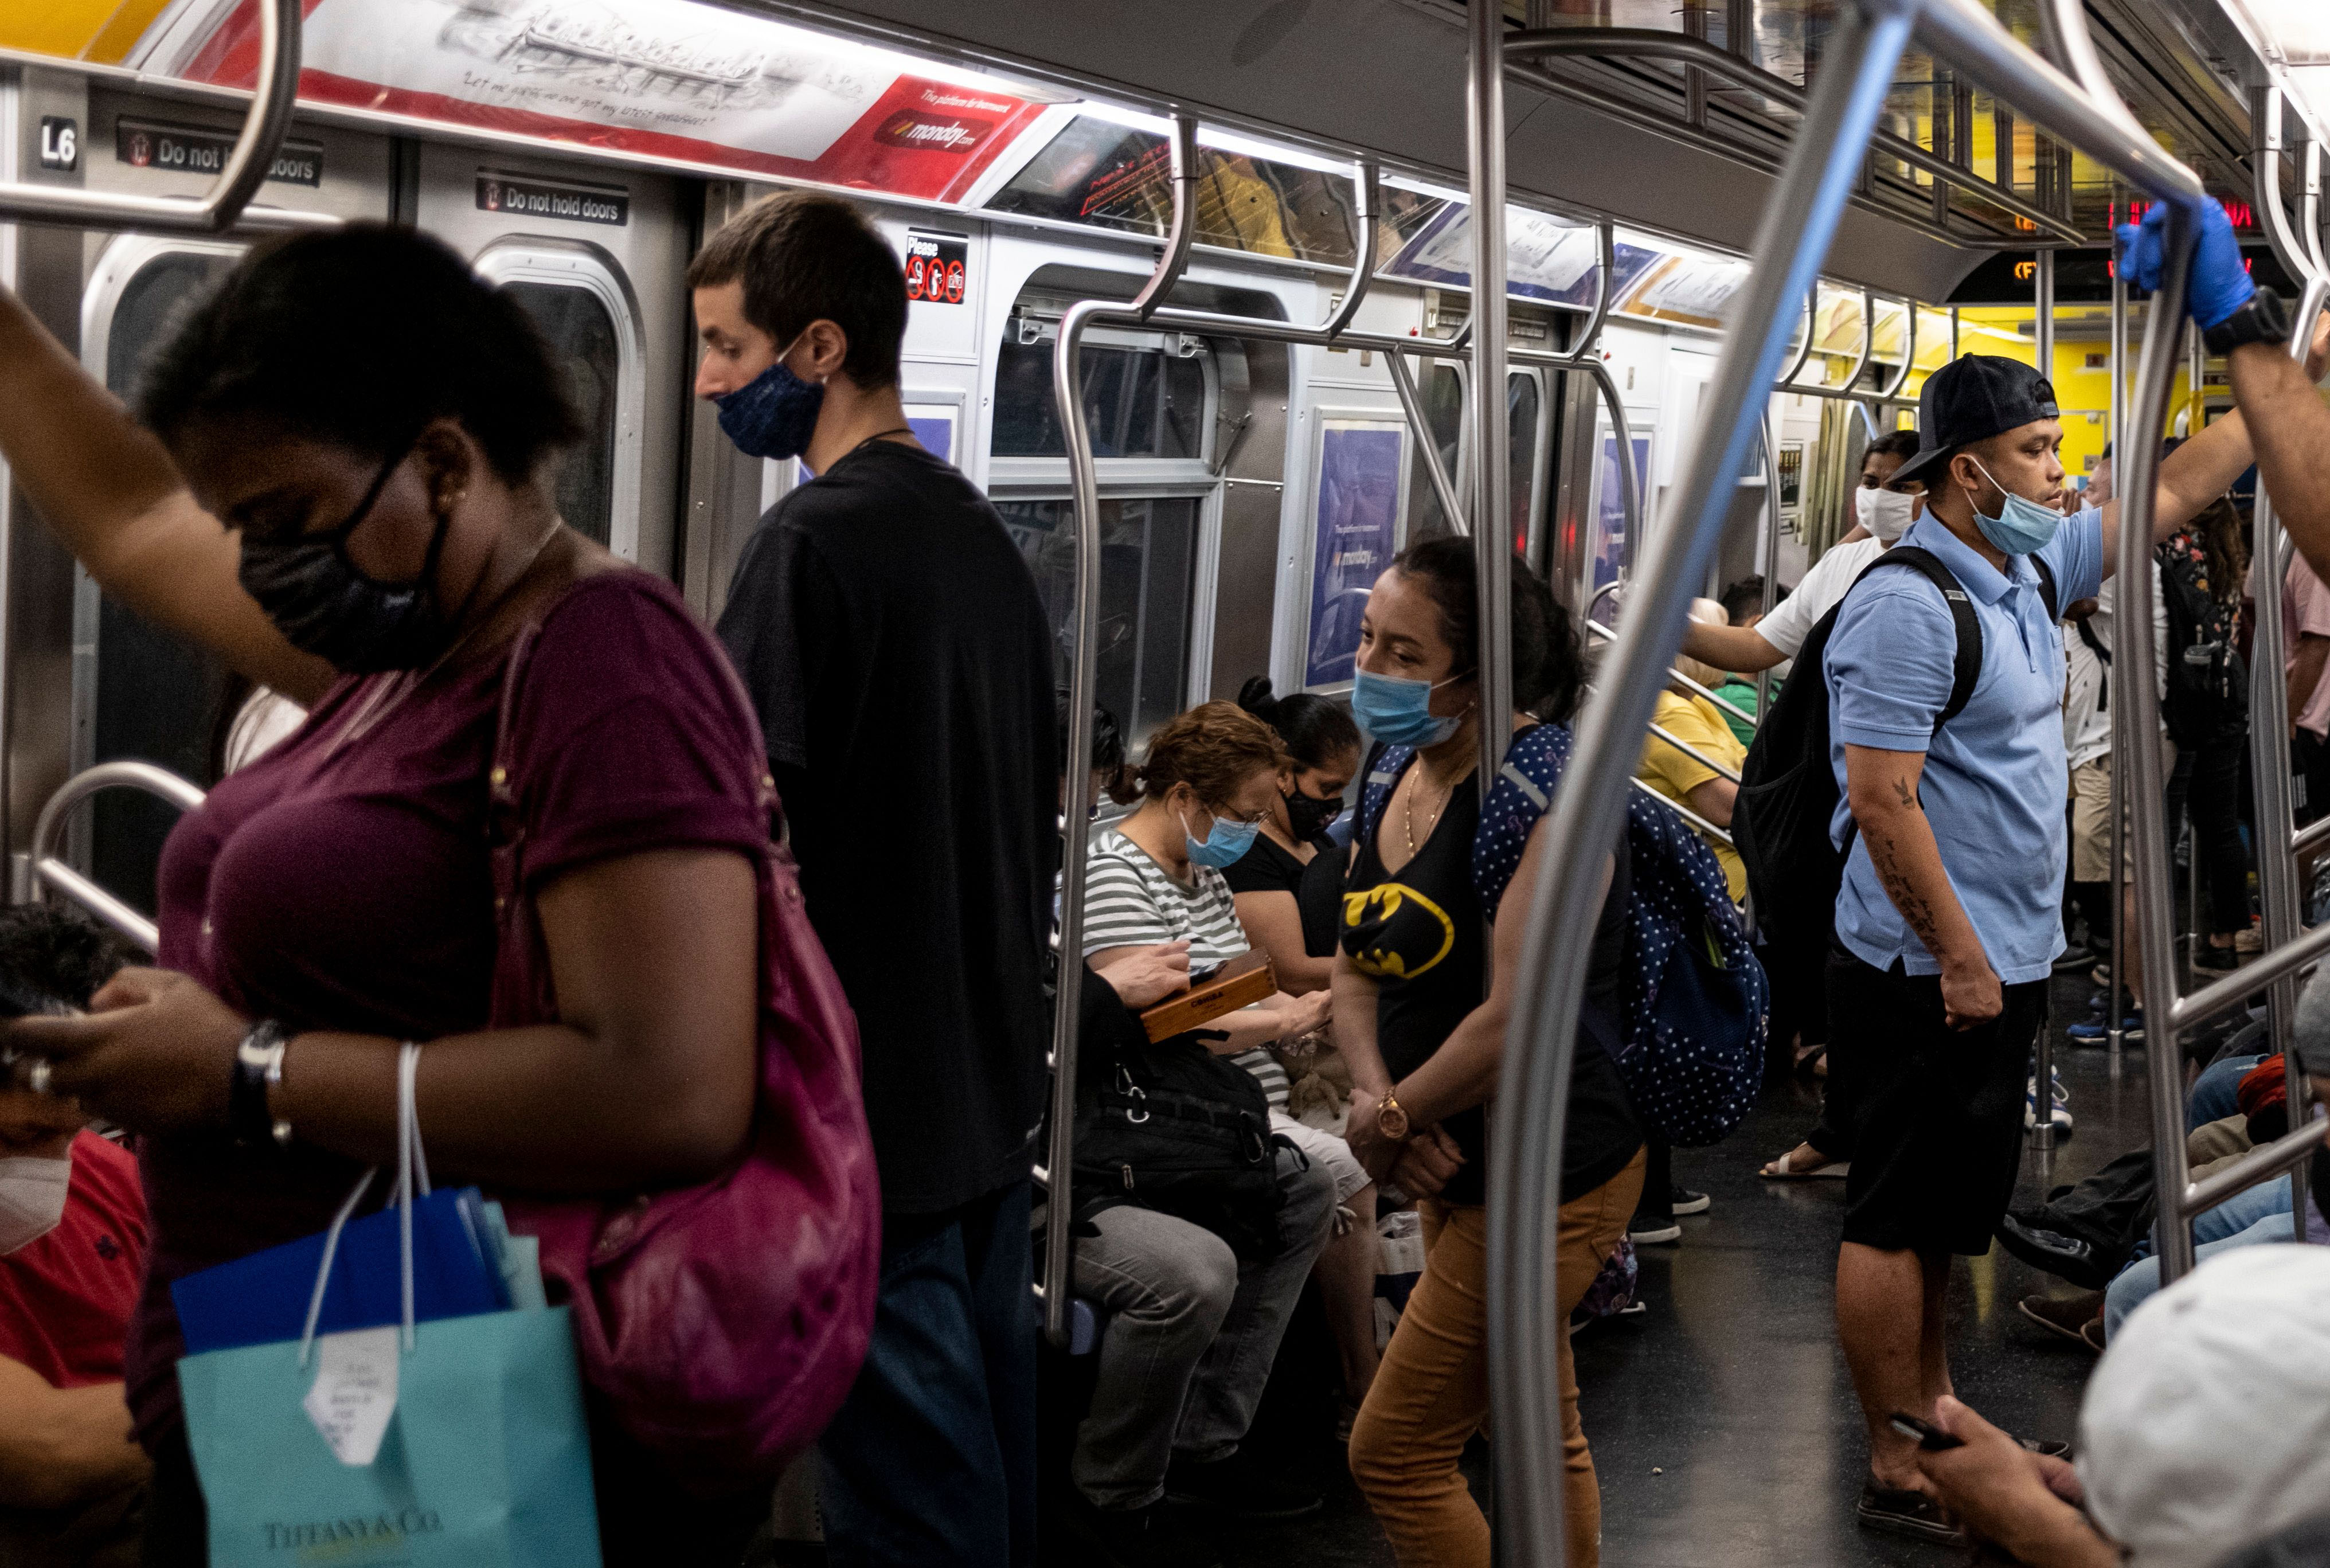 People ride the subway in New York on July 16.